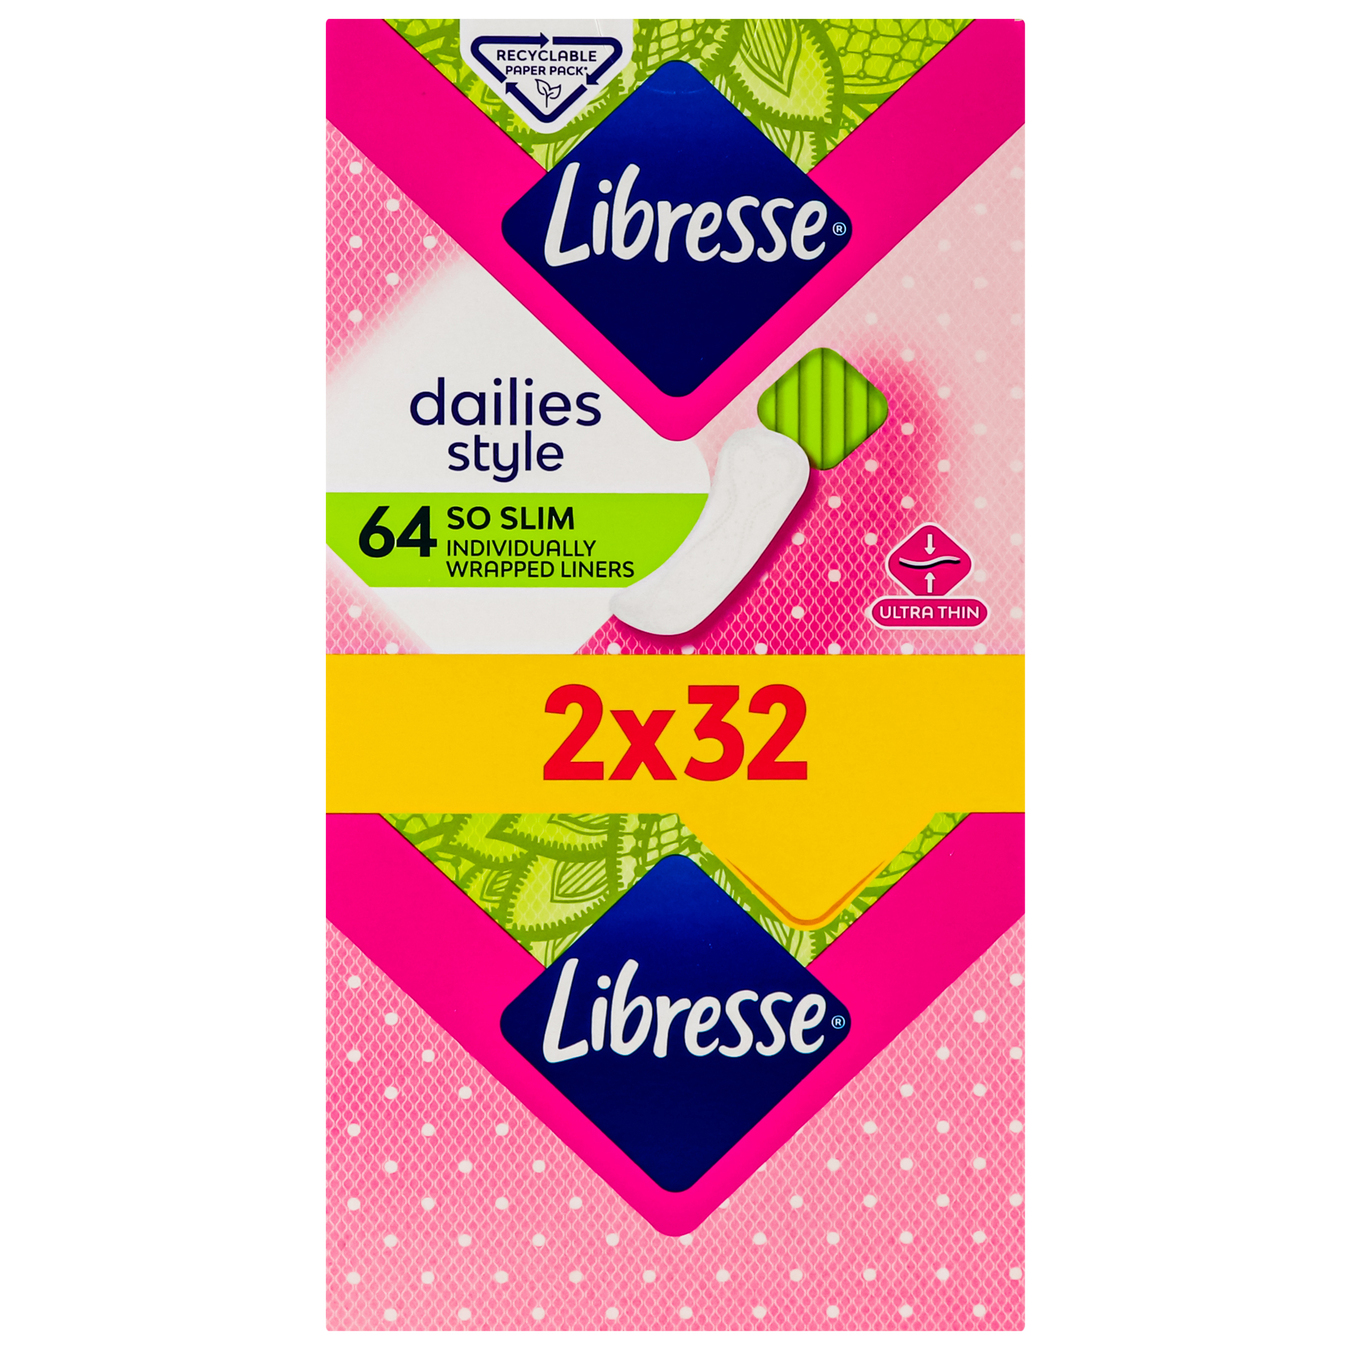 Libresse Daily Fresh Normal hygienic pads 64pcs